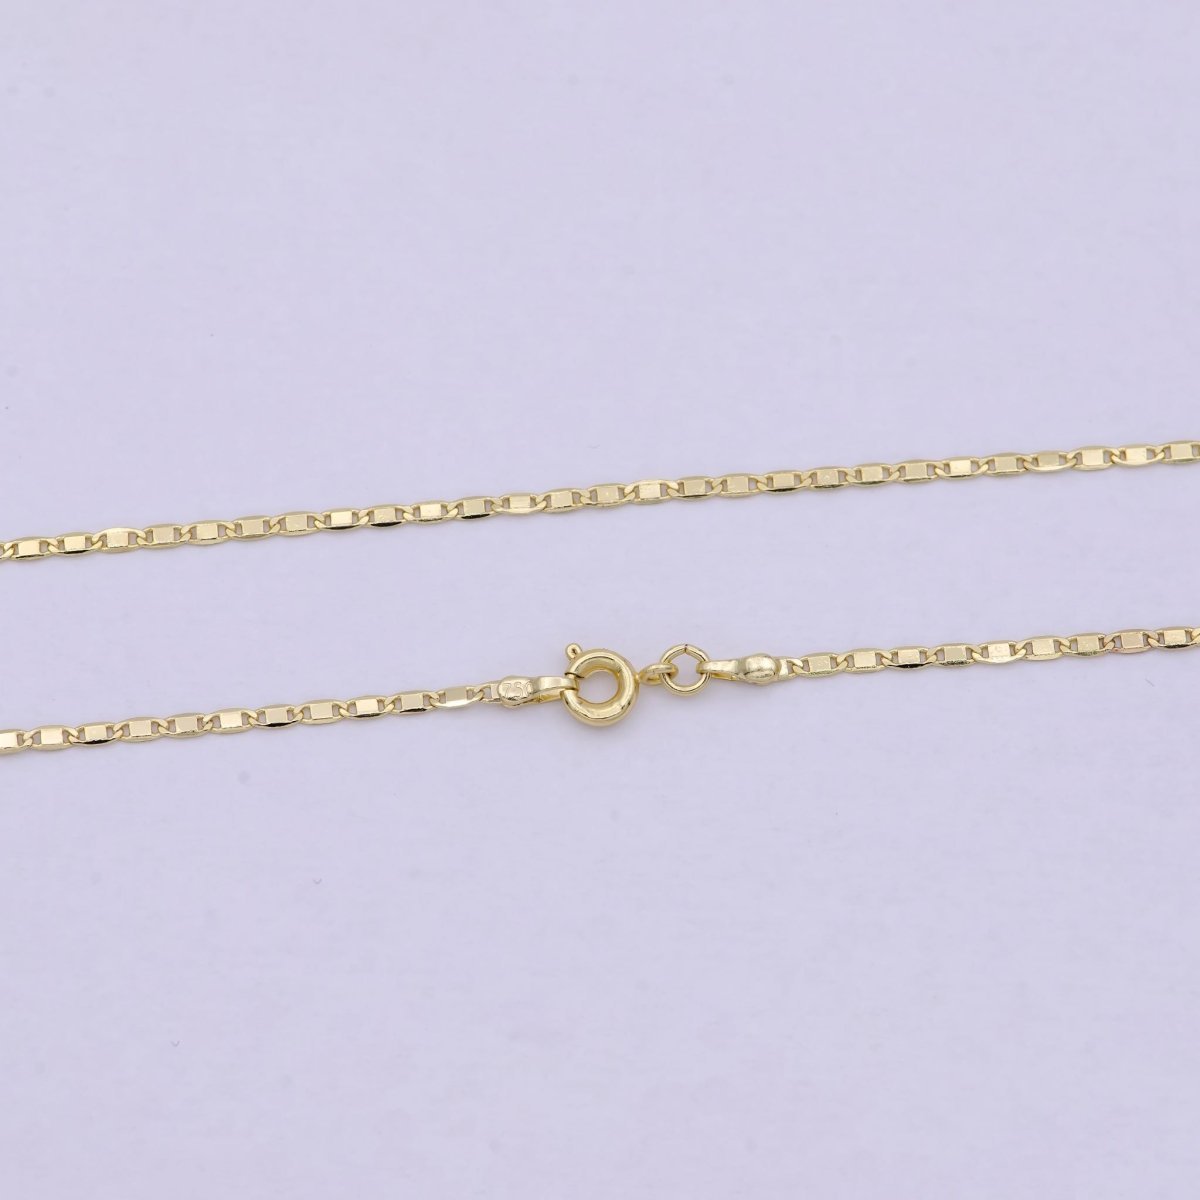 14K Gold Filled Anchor Chain, Dainty 1.6mm in Width, Layering 24 Inch Anchor Finished Chain with Spring Ring | WA-619 Clearance Pricing - DLUXCA